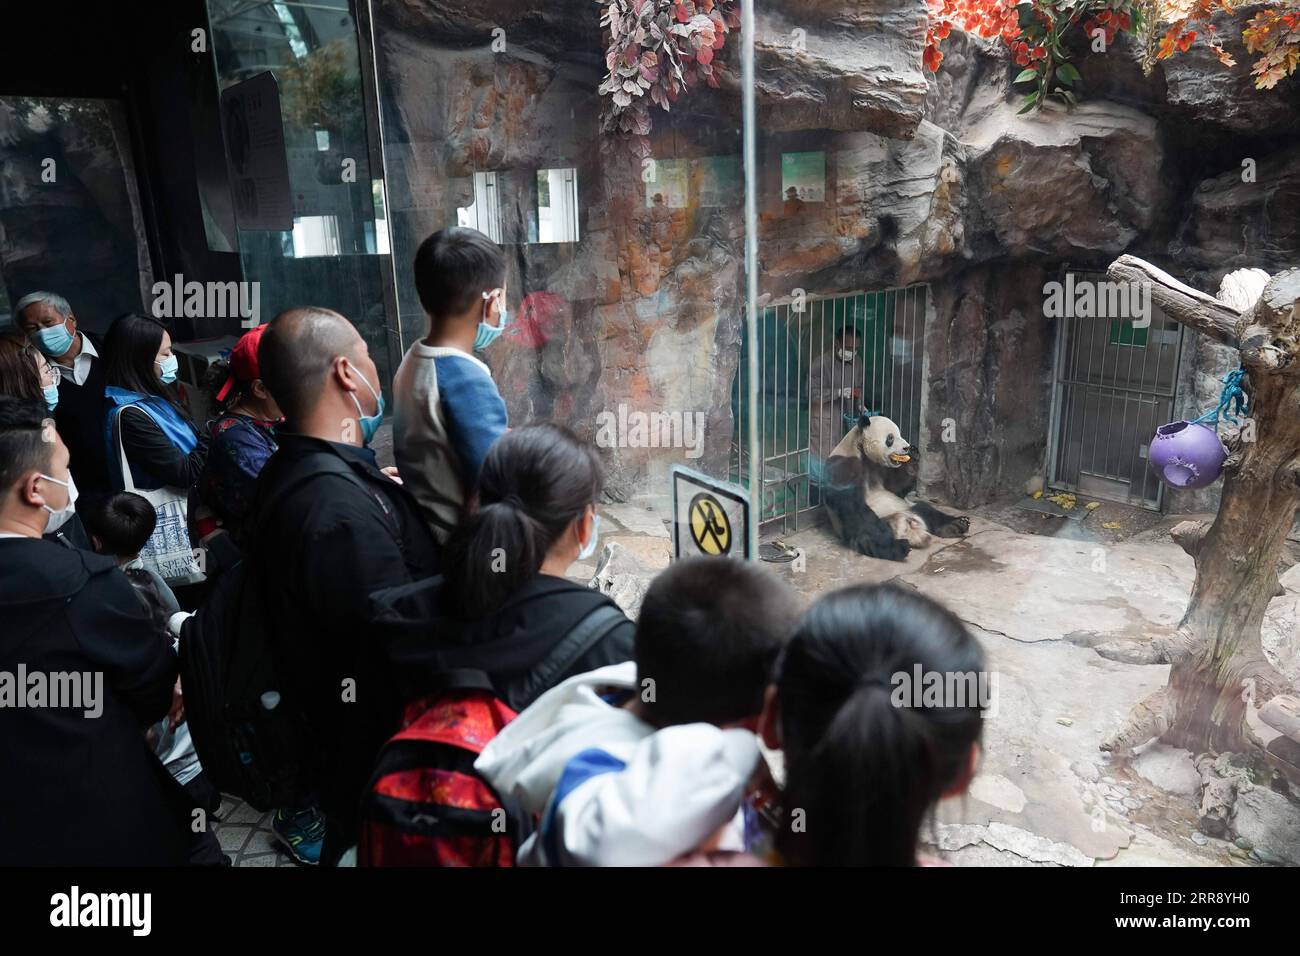 210521 -- BEIJING, May 21, 2021 -- Visitors watch giant panda Meng Er at the giant panda pavilion of Beijing Zoo in Beijing, capital of China, April 21, 2021. Ma Tao, 51 years old, breeder of the giant panda pavilion of Beijing Zoo, has been a feeder of giant pandas for 32 years. Every day, before working, Ma observes the condition of giant pandas and adjusts food recipe for them. Over the past years, Ma has fed about 20 giant pandas, with whom he also developed deep emotions. Nowadays he can quickly judge the health condition of the animal with methods he explored and concluded. He also teach Stock Photo